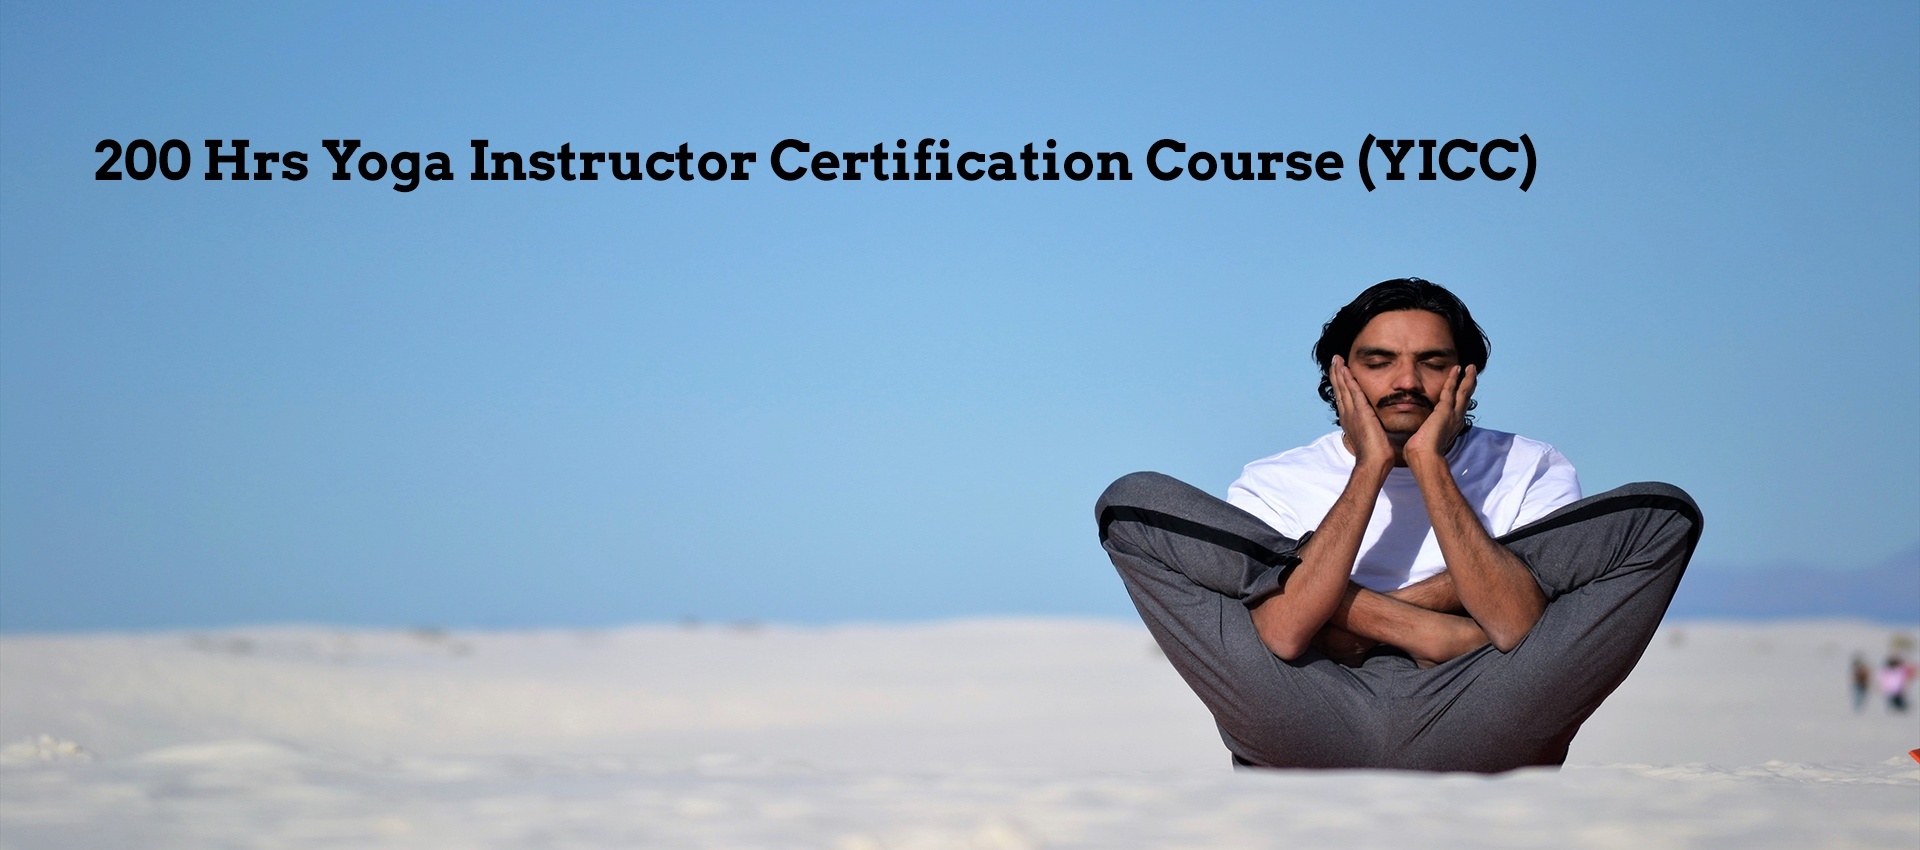 Yoga Instructor Certificate Course (YICC) – 200 Hours